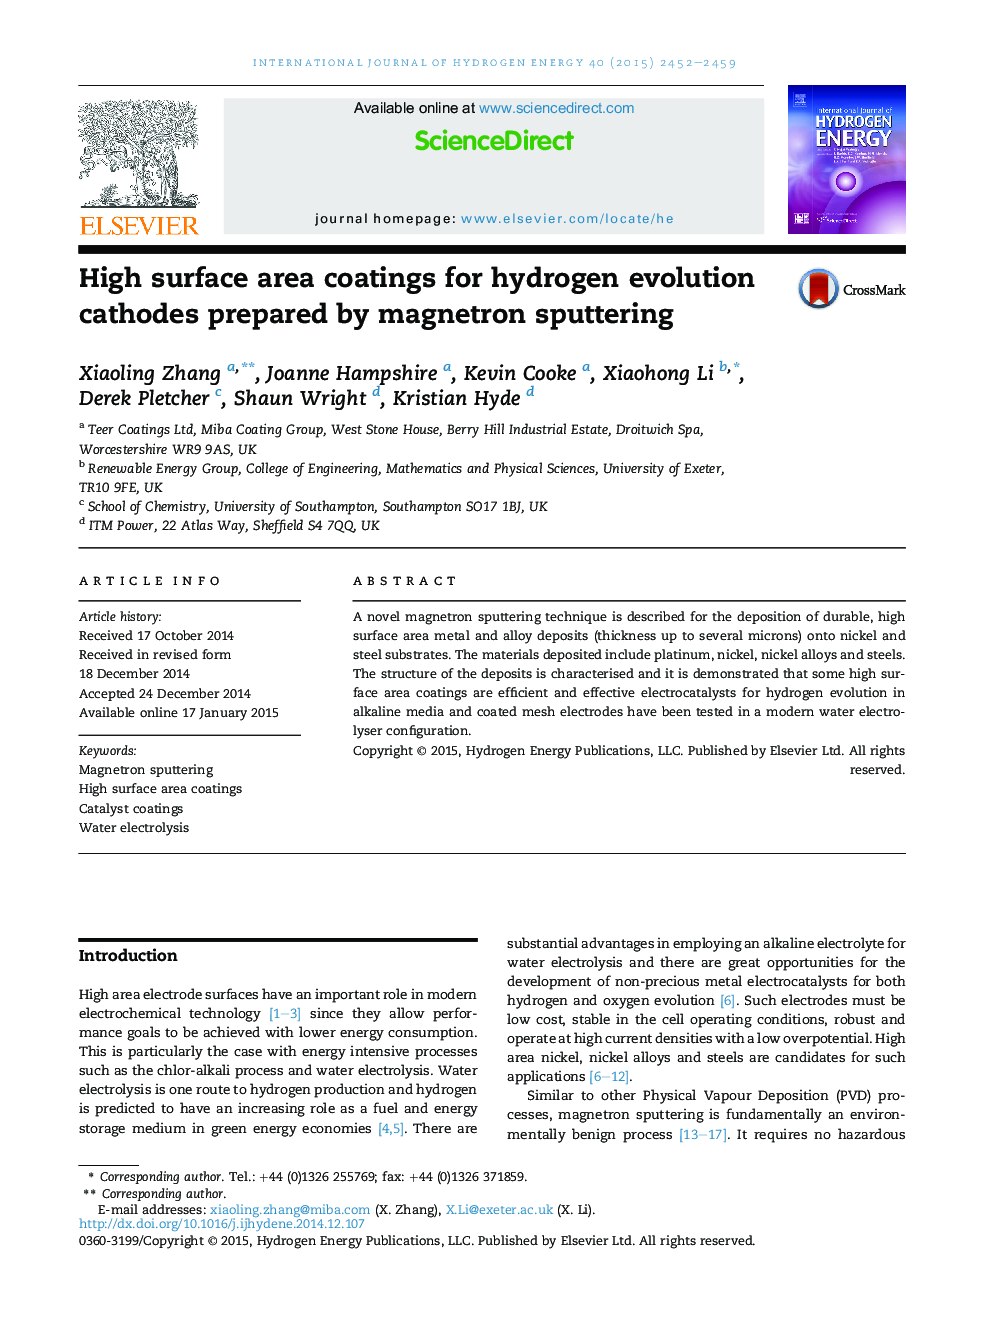 High surface area coatings for hydrogen evolution cathodes prepared by magnetron sputtering